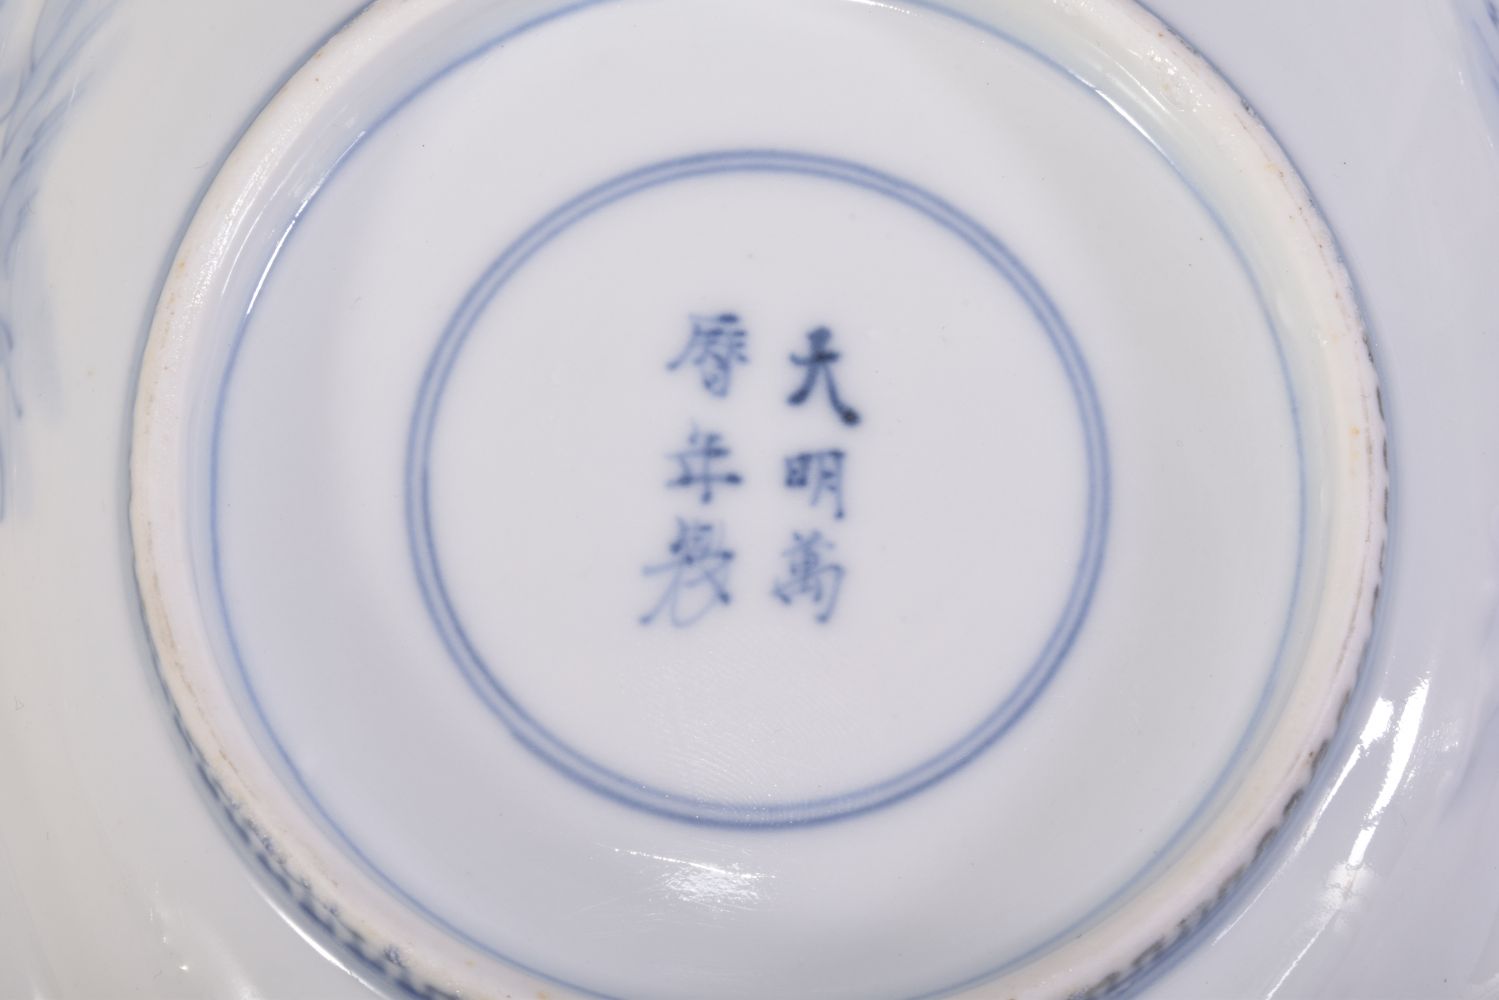 SIX CHINESE BLUE AND WHITE PORCELAIN FISH FORM DISHES, the dishes painted as fish, each dish with - Image 4 of 4